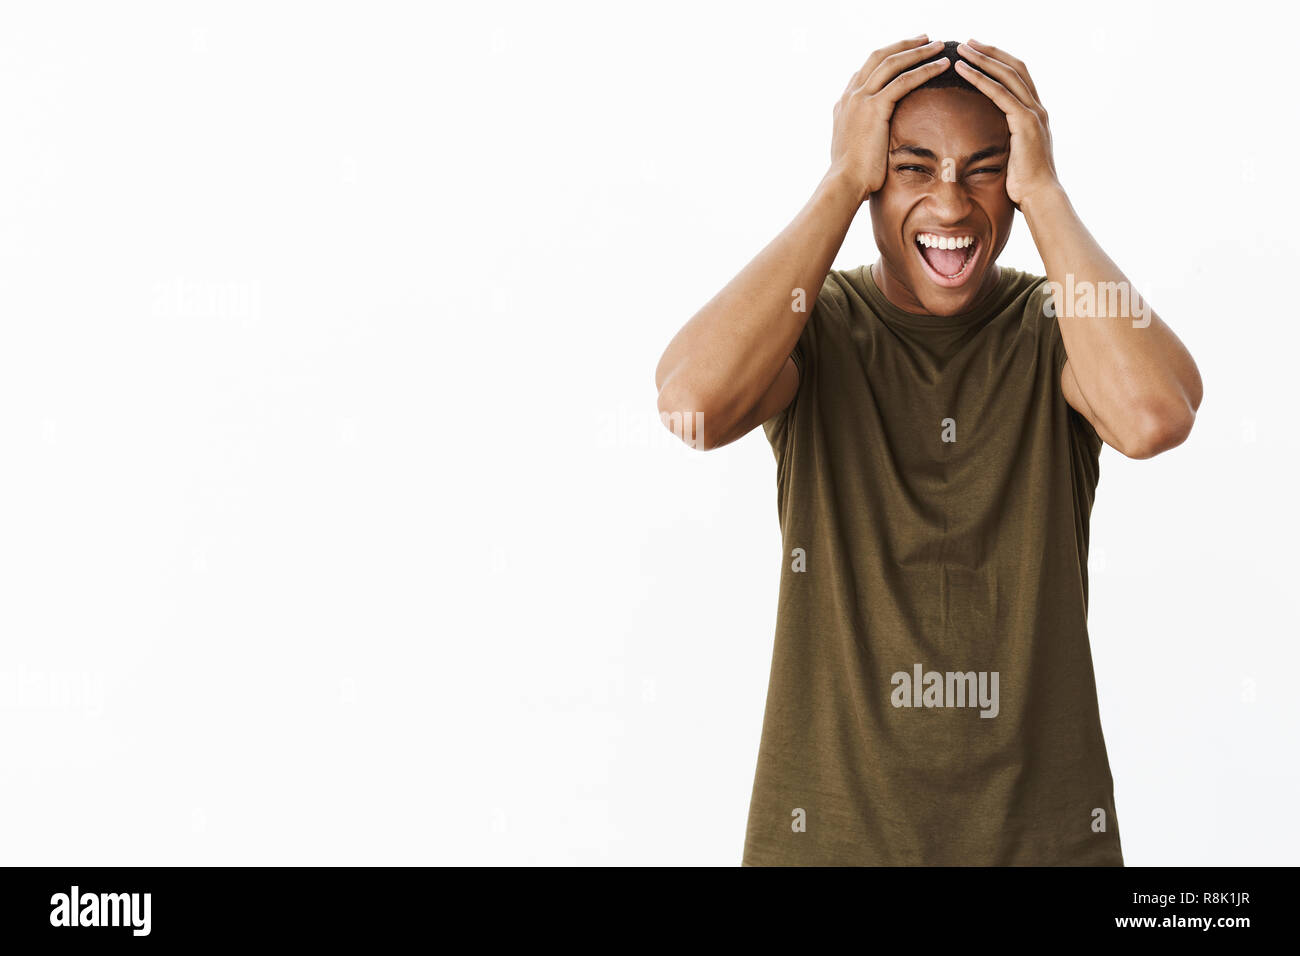 Portrait of pressured and intense fed up young african american male student yelling from distress holding hands on head in panic and losing temper, standing unhappy upset over gray background Stock Photo